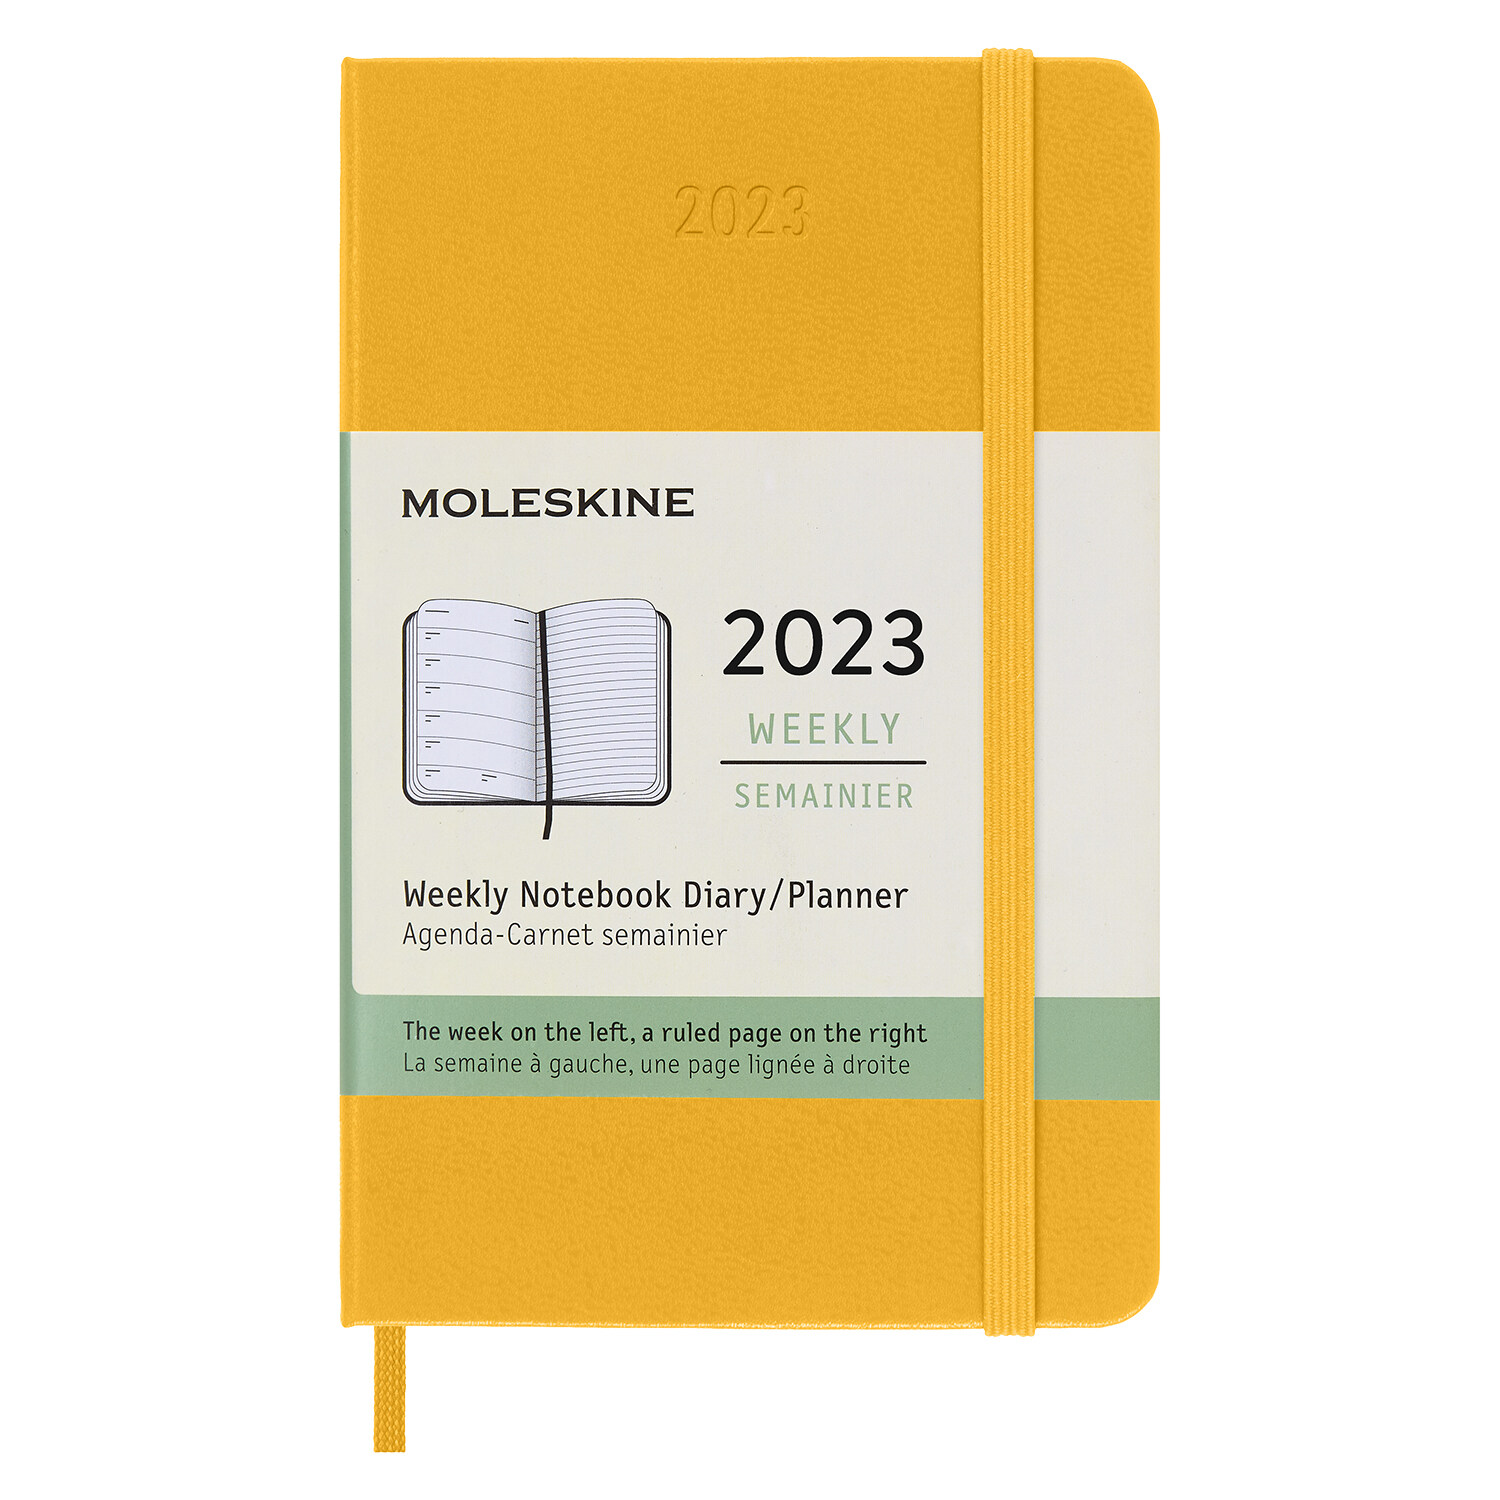 Moleskine 2023 Weekly Notebook Planner, 12m, Pocket, Orange Yellow, Hard Cover (3.5 X 5.5) (Other)